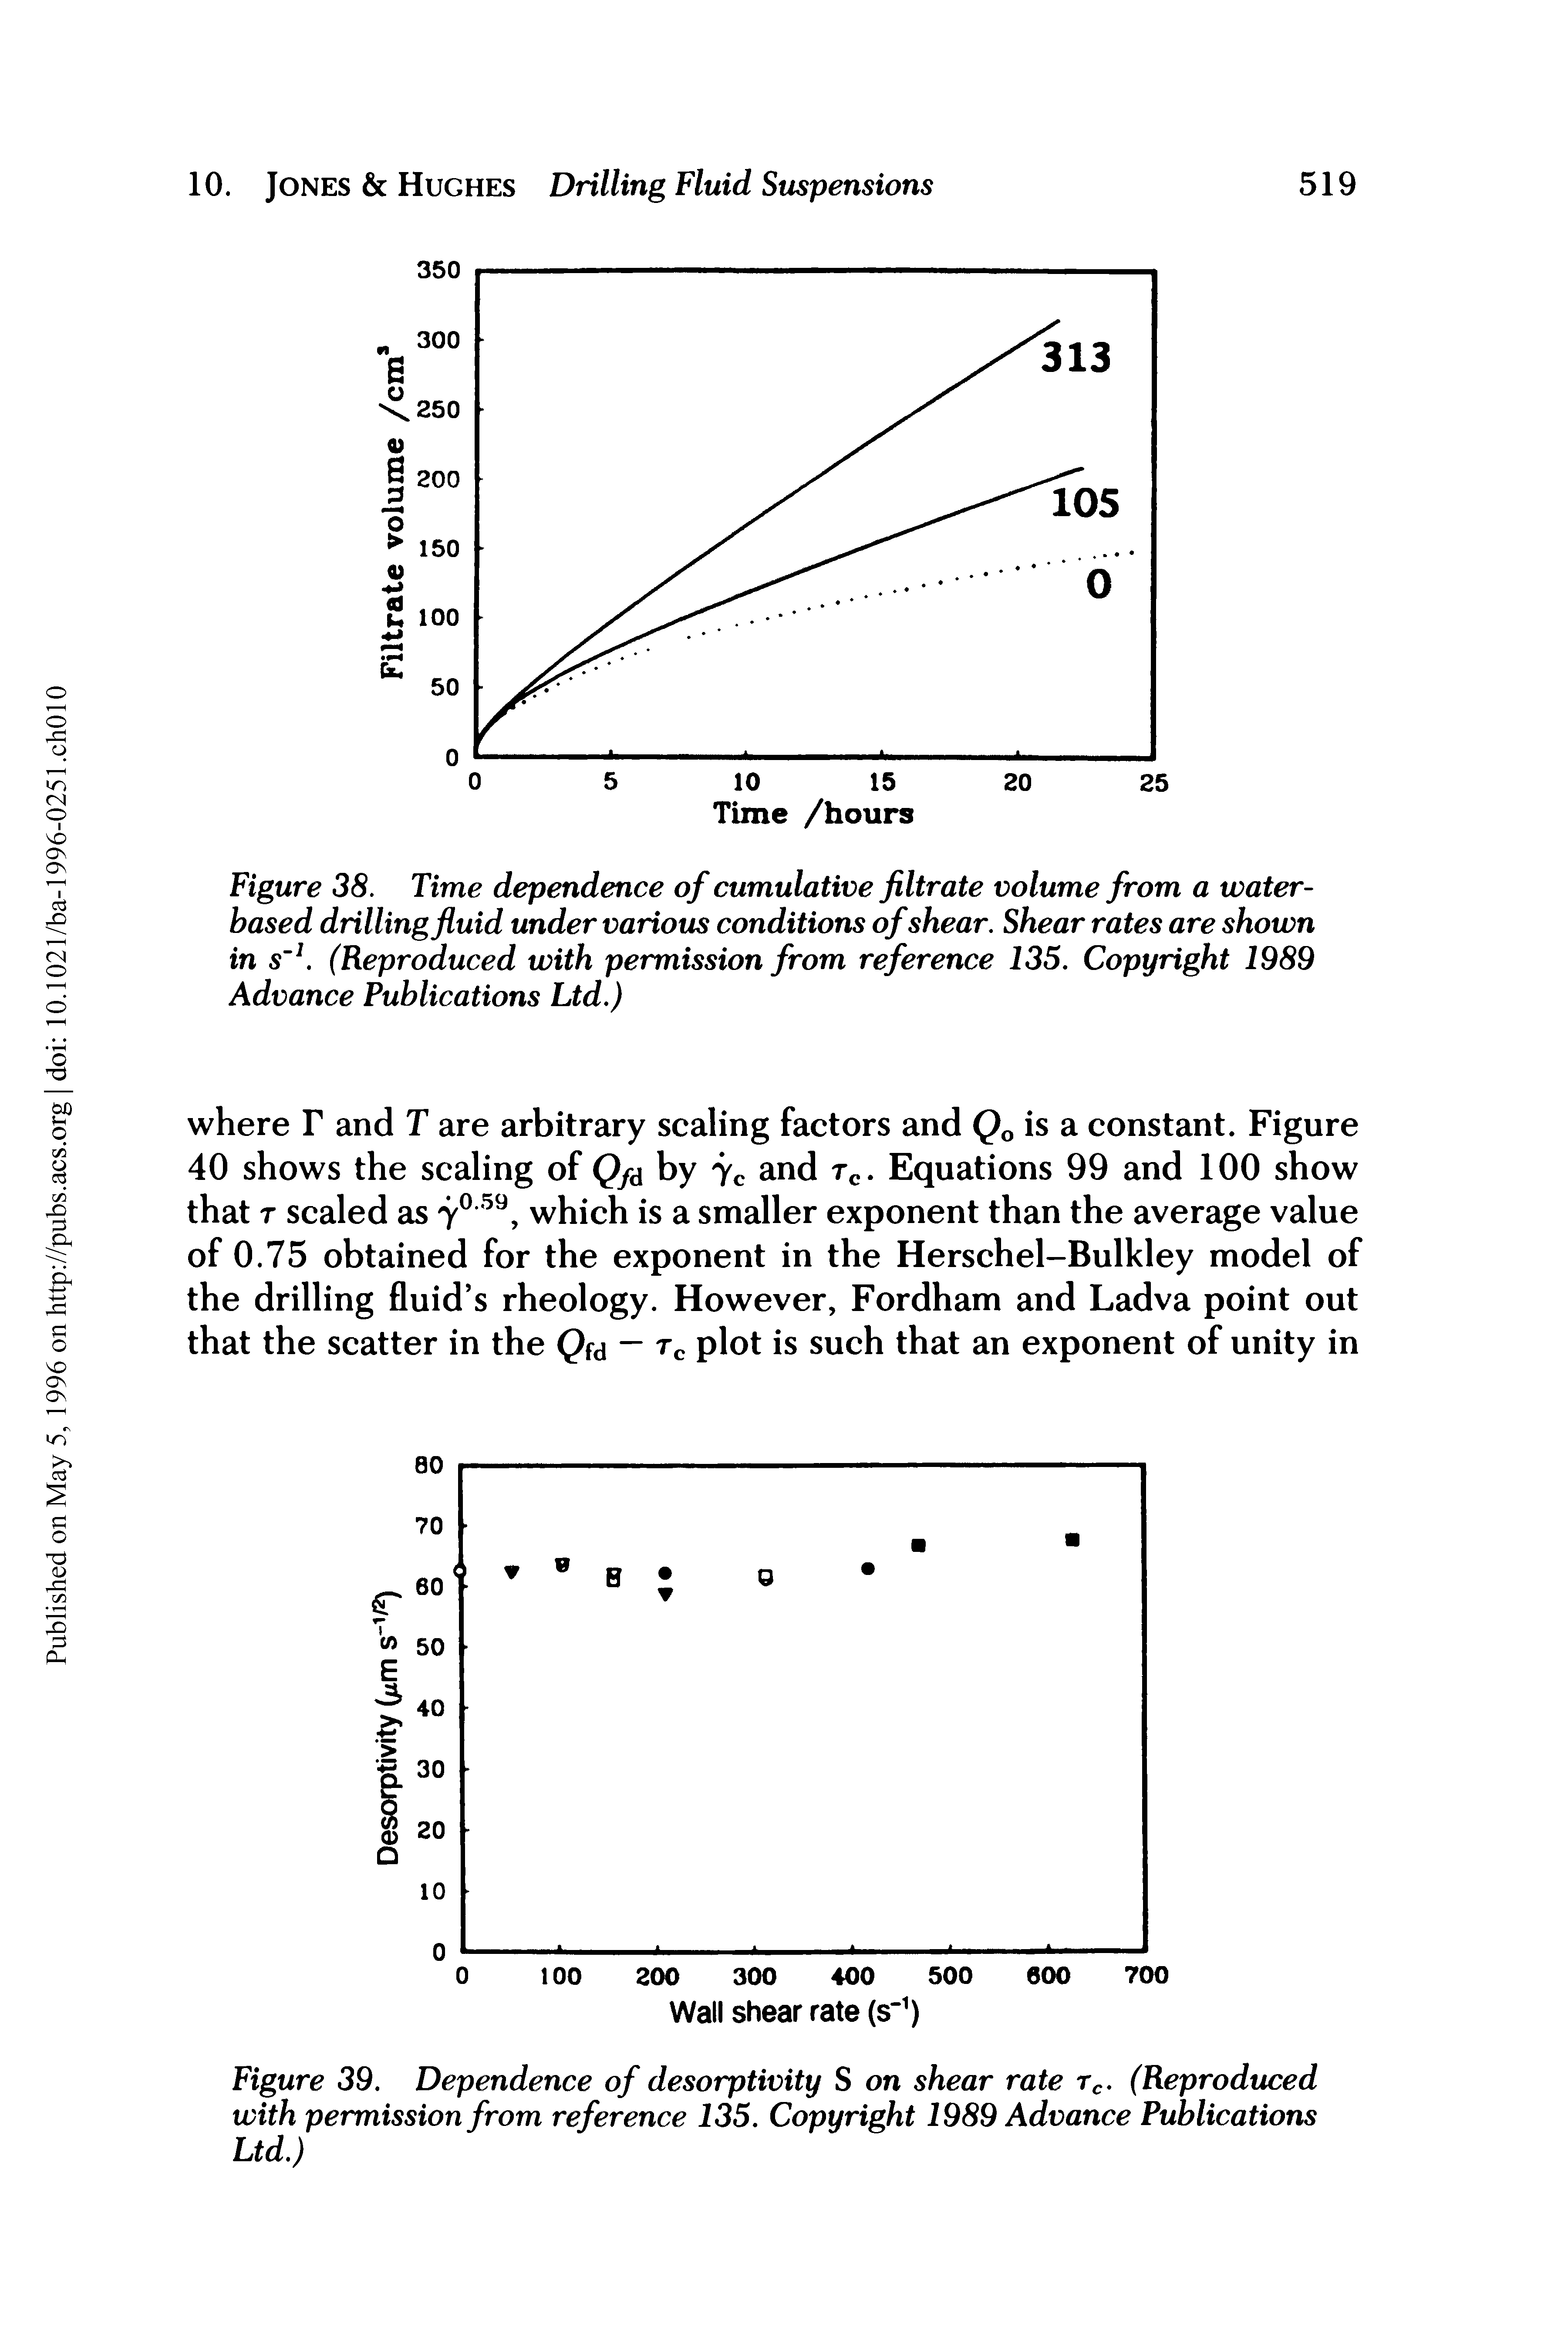 Figure 38. Time dependence of cumulative filtrate volume from a water-based drilling fluid under various conditions of shear. Shear rates are shown in s 1. (Reproduced with permission from reference 135. Copyright 1989 Advance Publications Ltd.)...